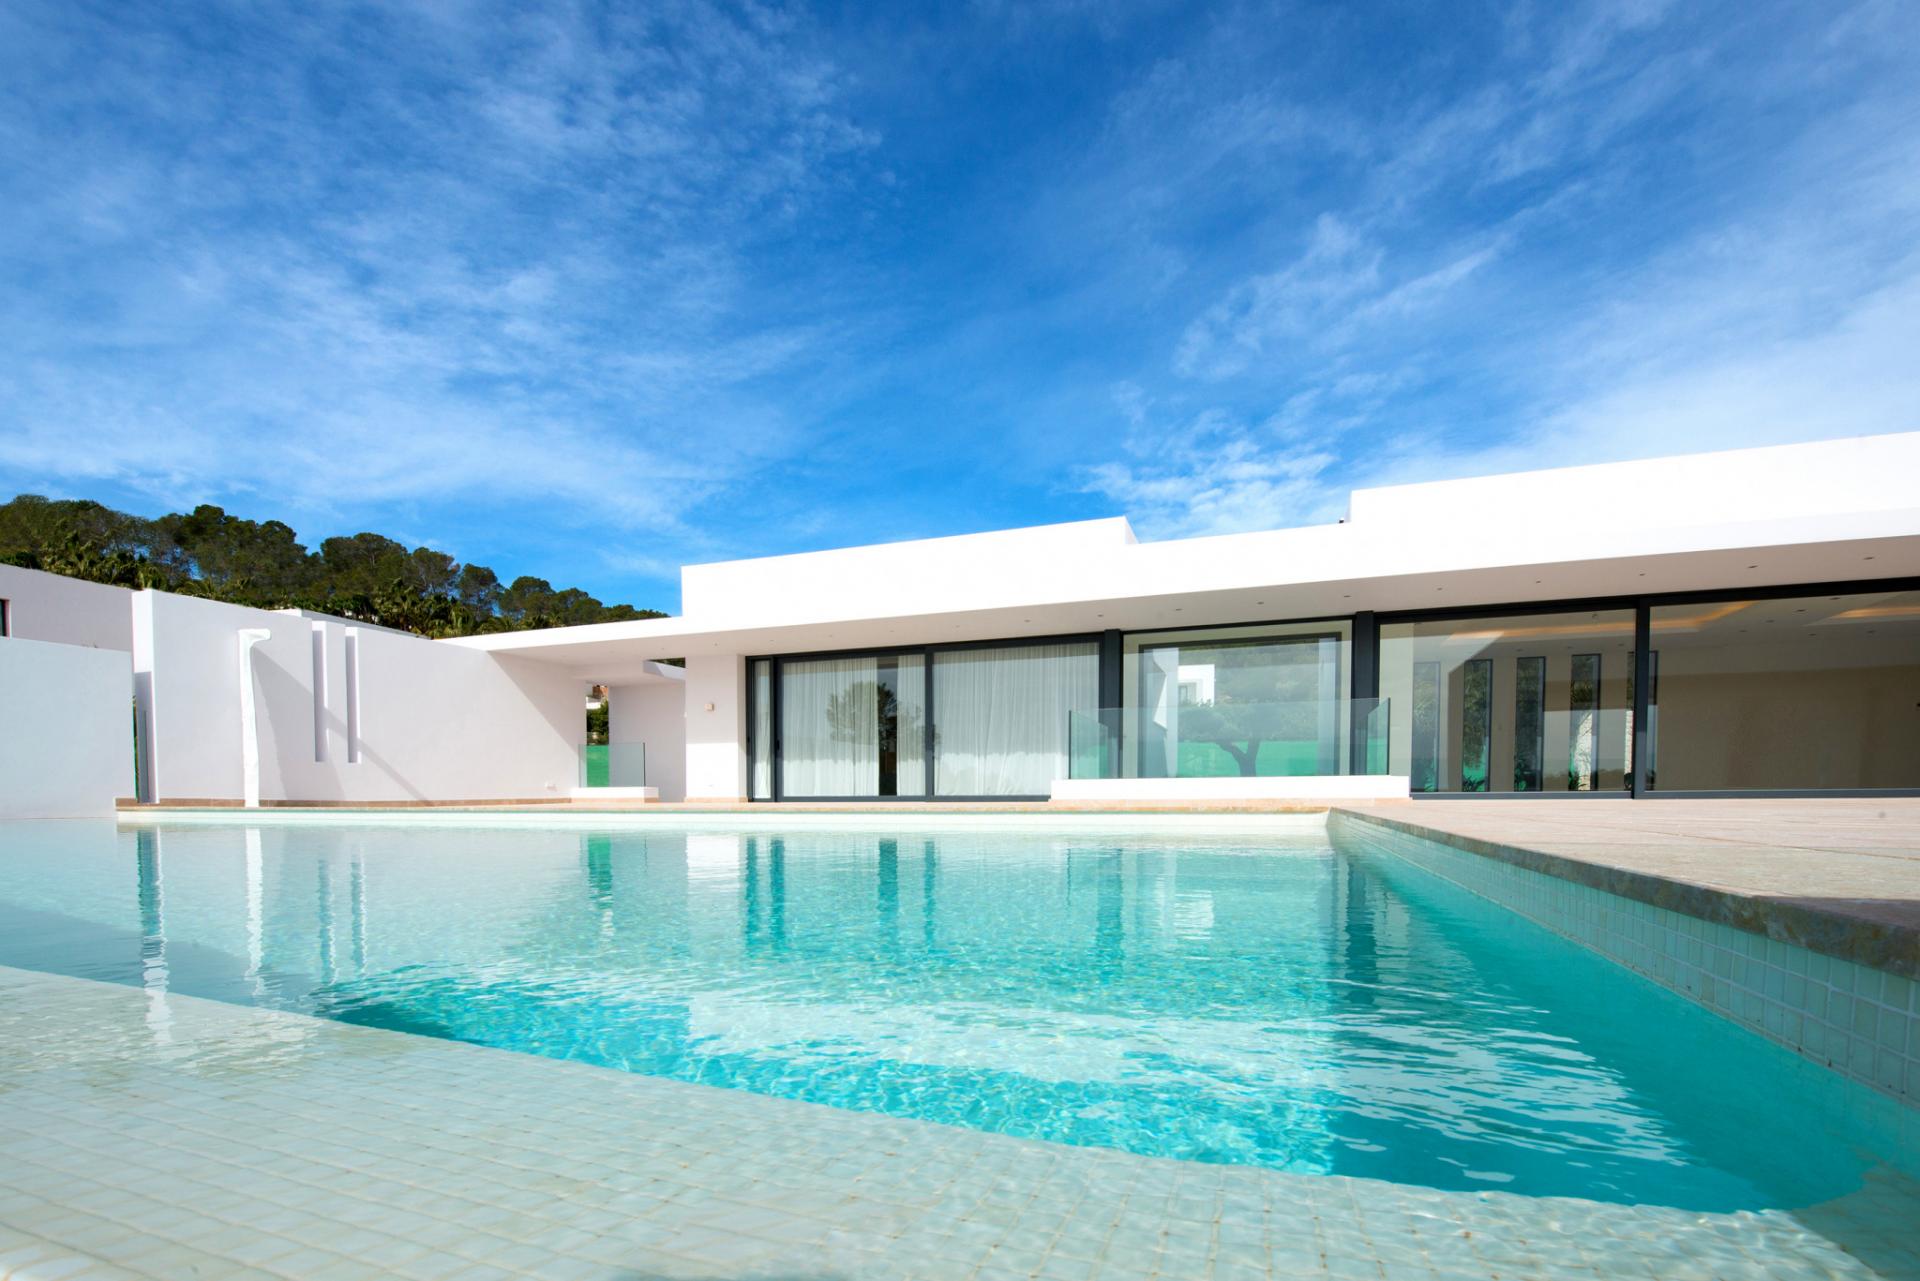 Luxury Property Market Is Thriving In Spain